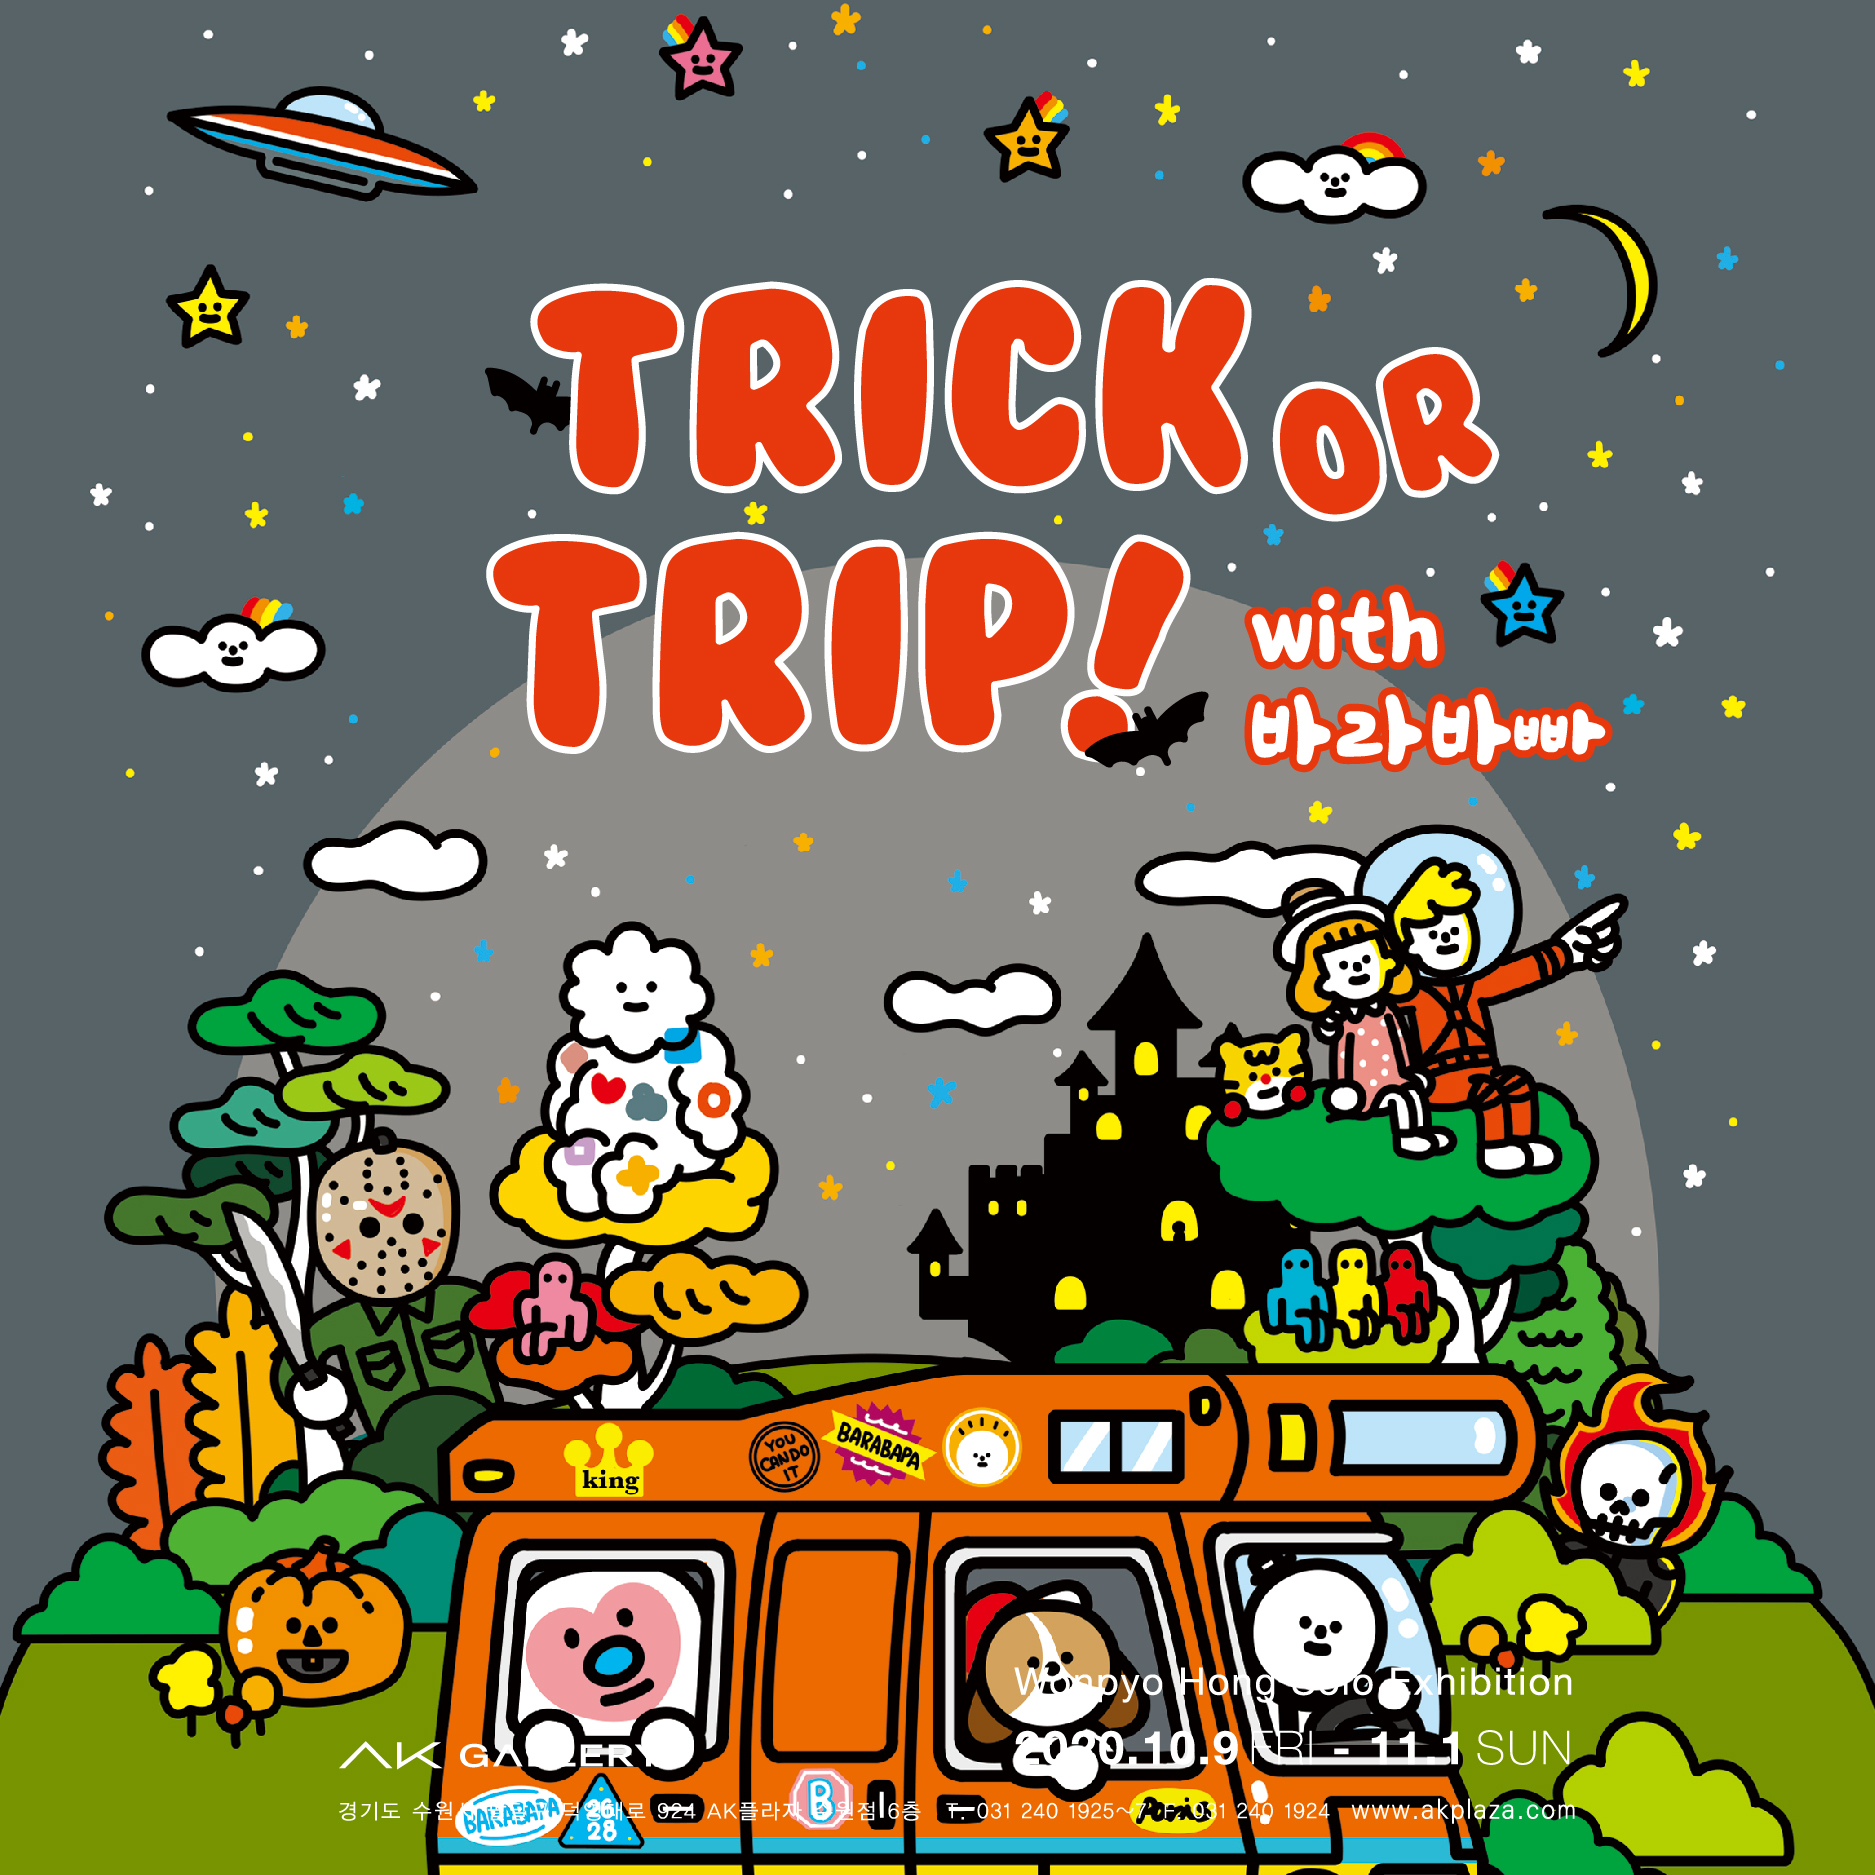 Trick or Trip! with 바라바빠 展 (2020. 10. 9 ~ 2020. 11.1)